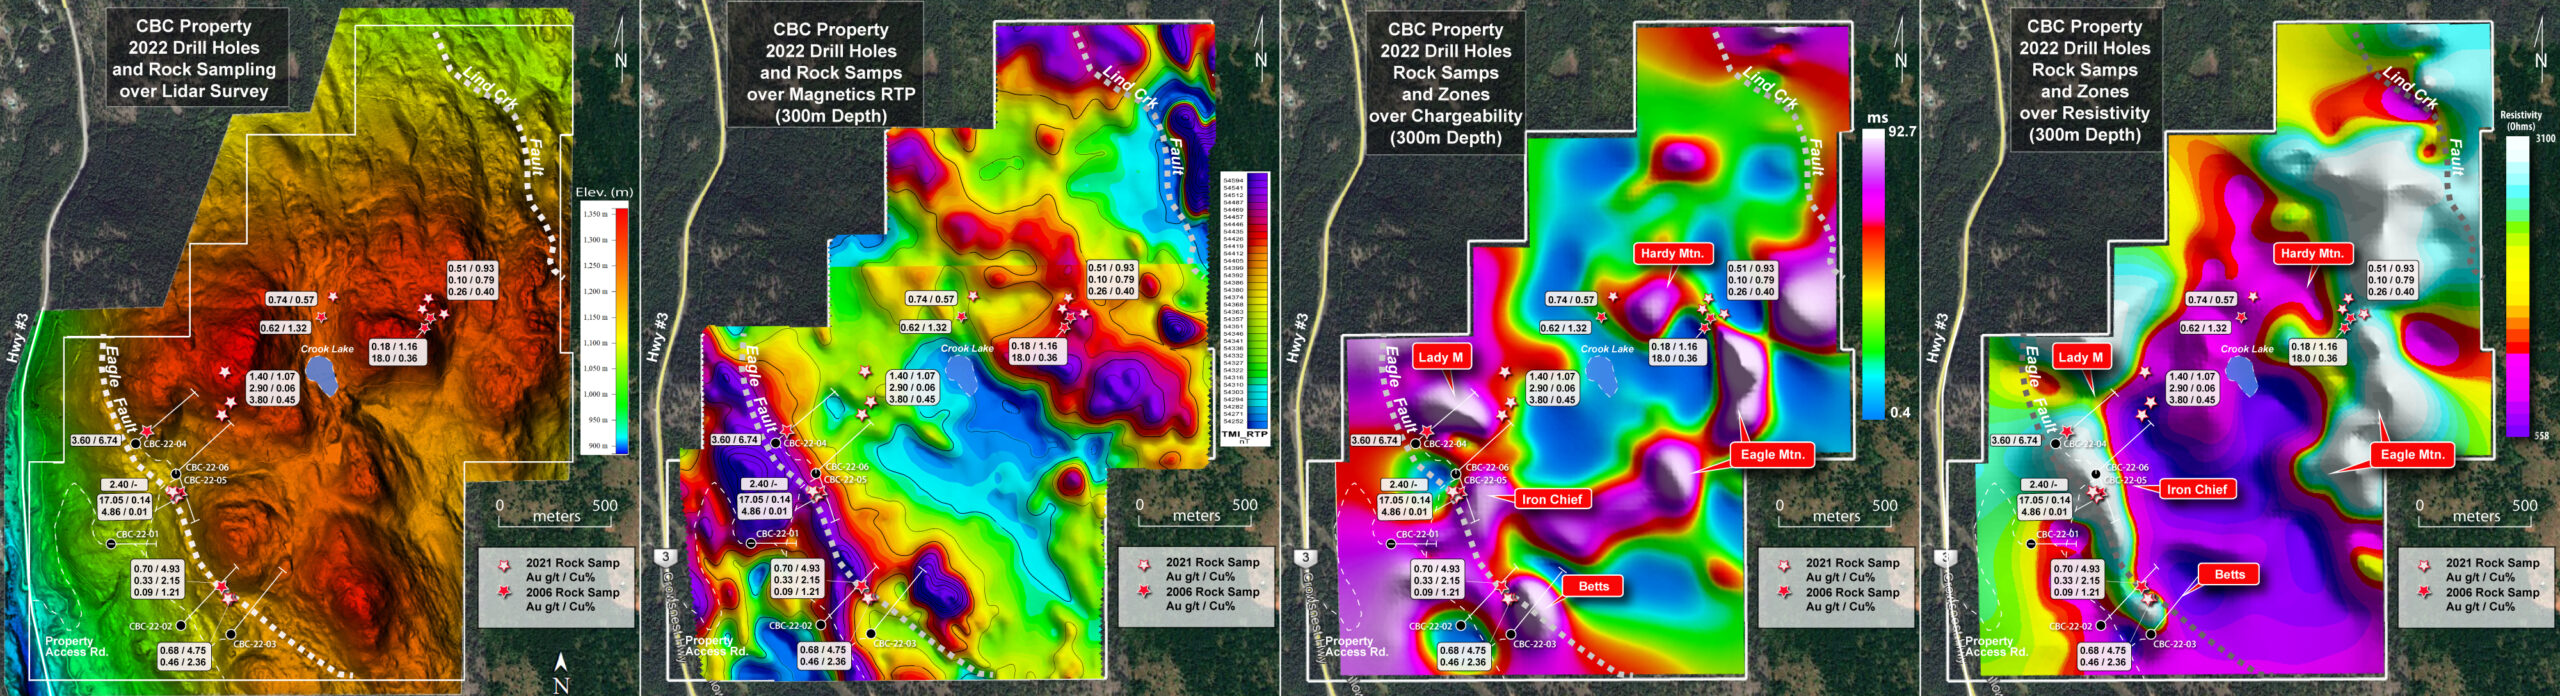 Belmont Resources - CBC Project - 2022 Drill Holes over Geophysics